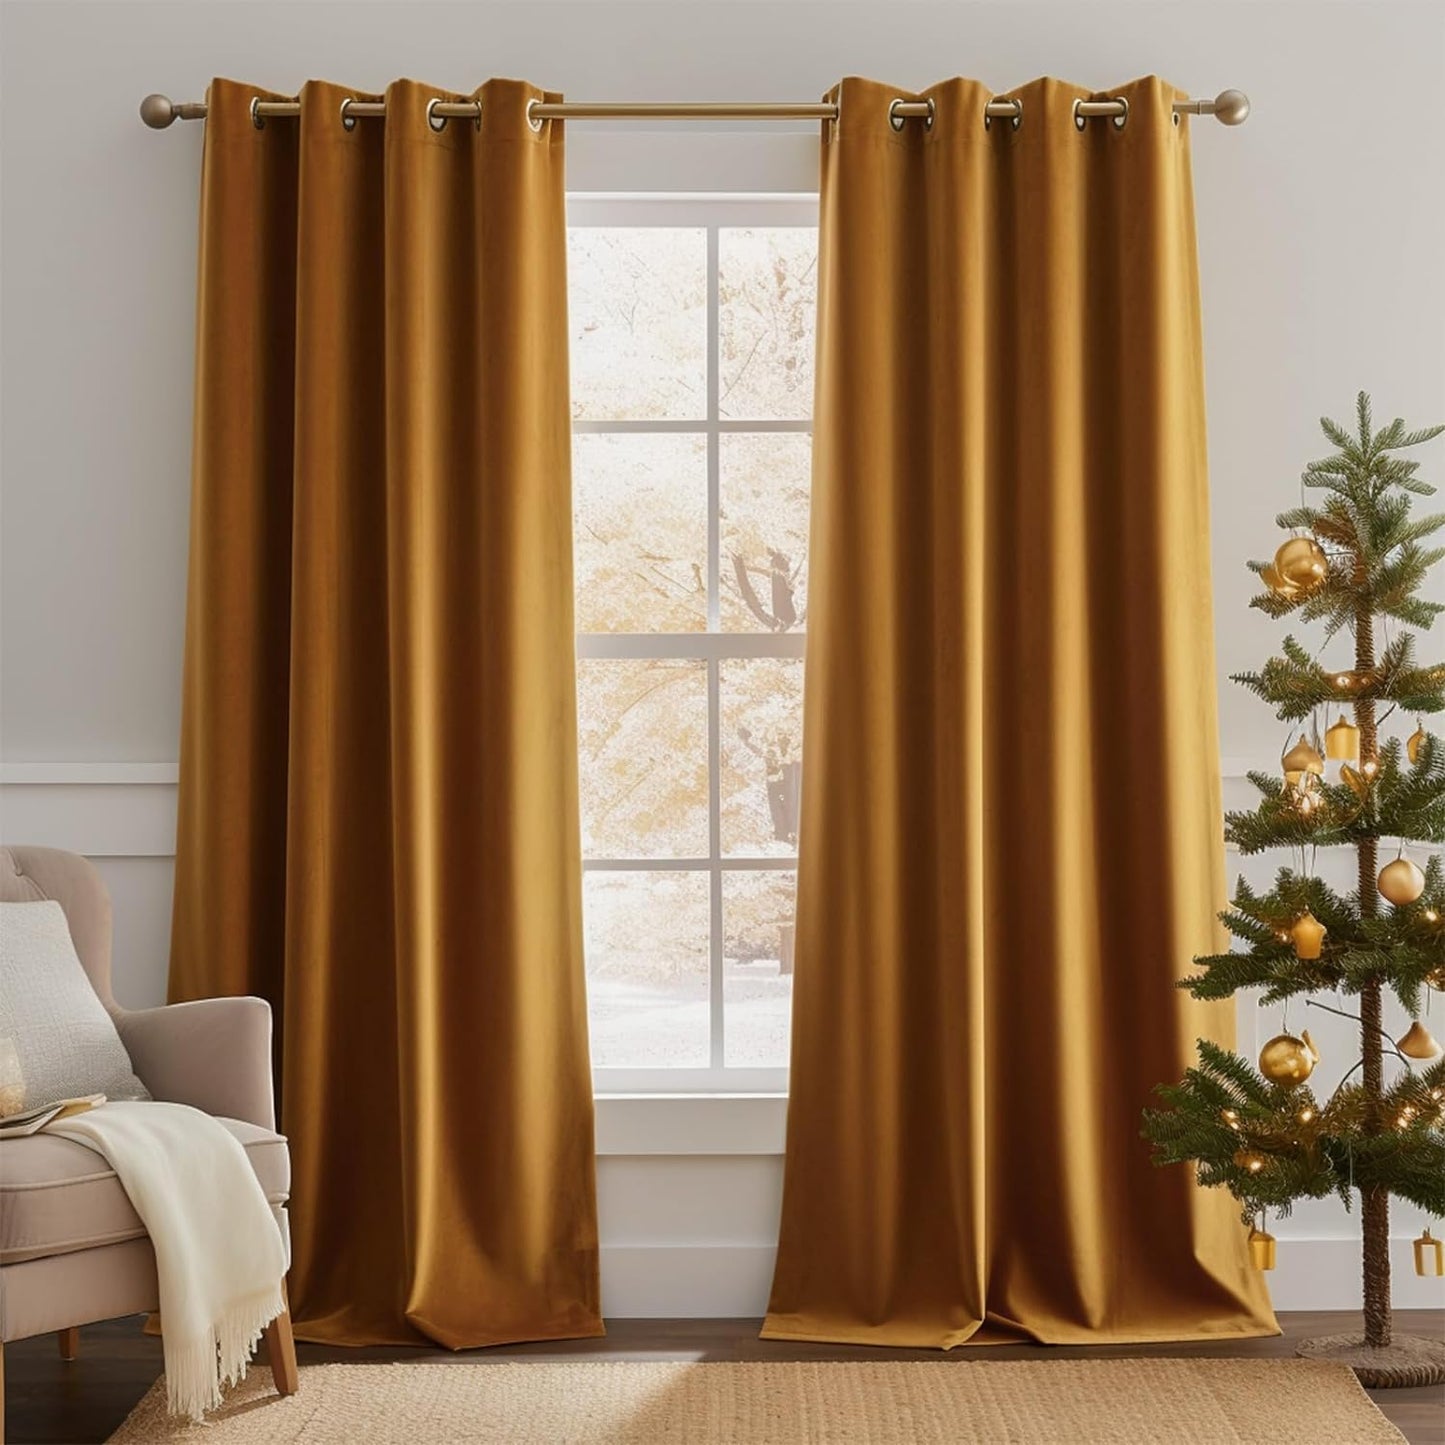 Lazzzy Velvet Blackout Curtains Brown Thermal Insulated Curtains 84 Room Darkening Window Drapes Super Soft Luxury Curtains for Living Room Bedroom Rod Pocket 2 Panels 84 Inch Long Gold Brown  TOPICK *Grommet | Gold Brown W52 X L90 